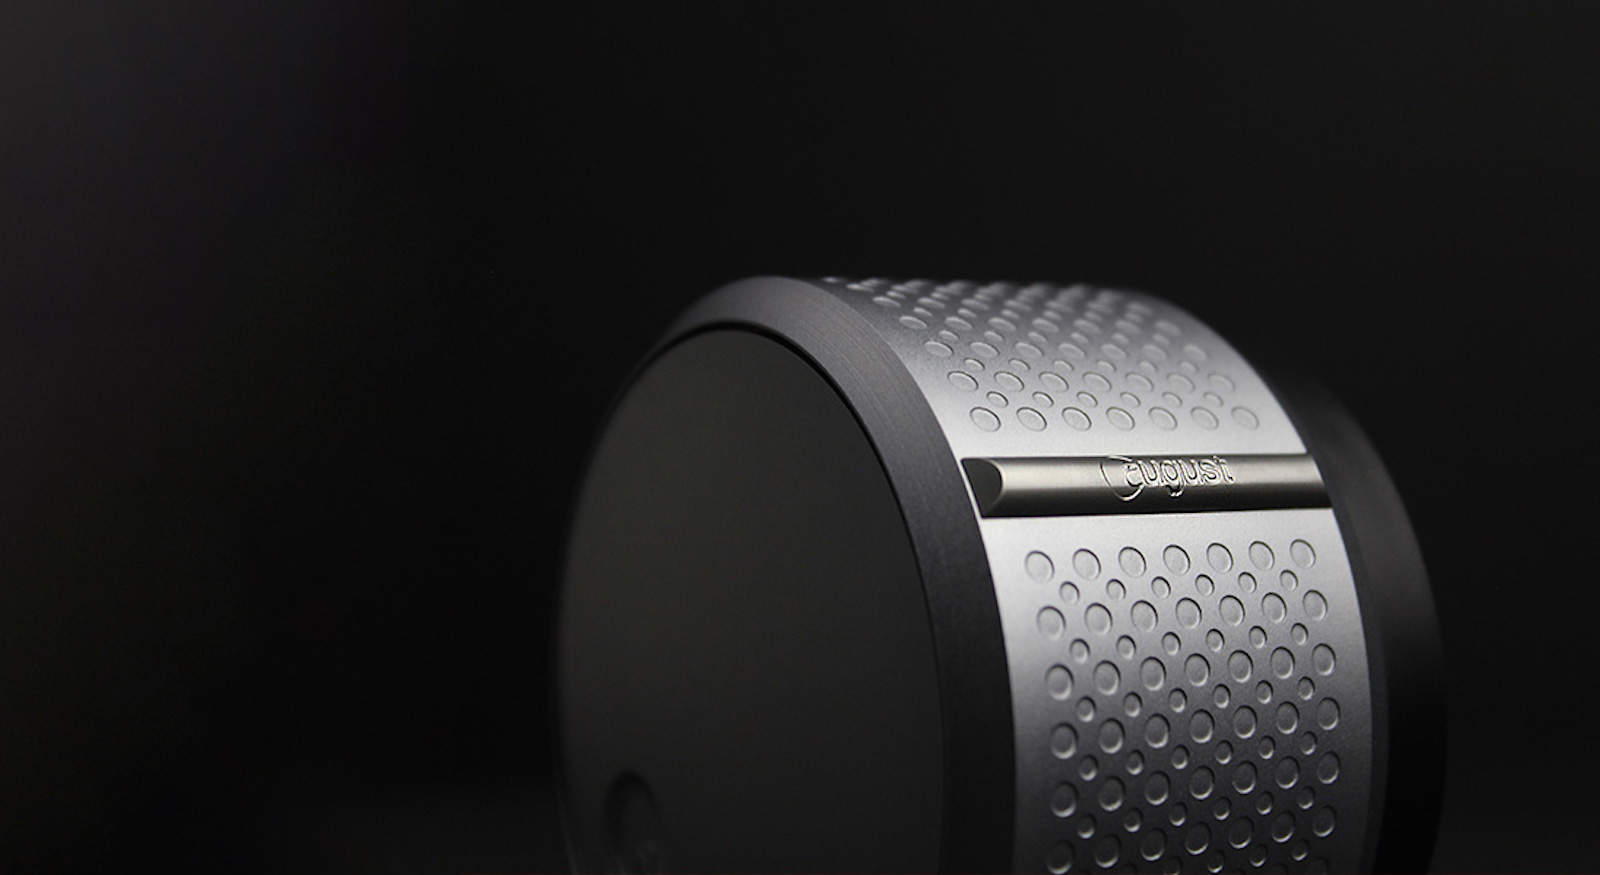 August Smart Lock can now be controlled by Siri.